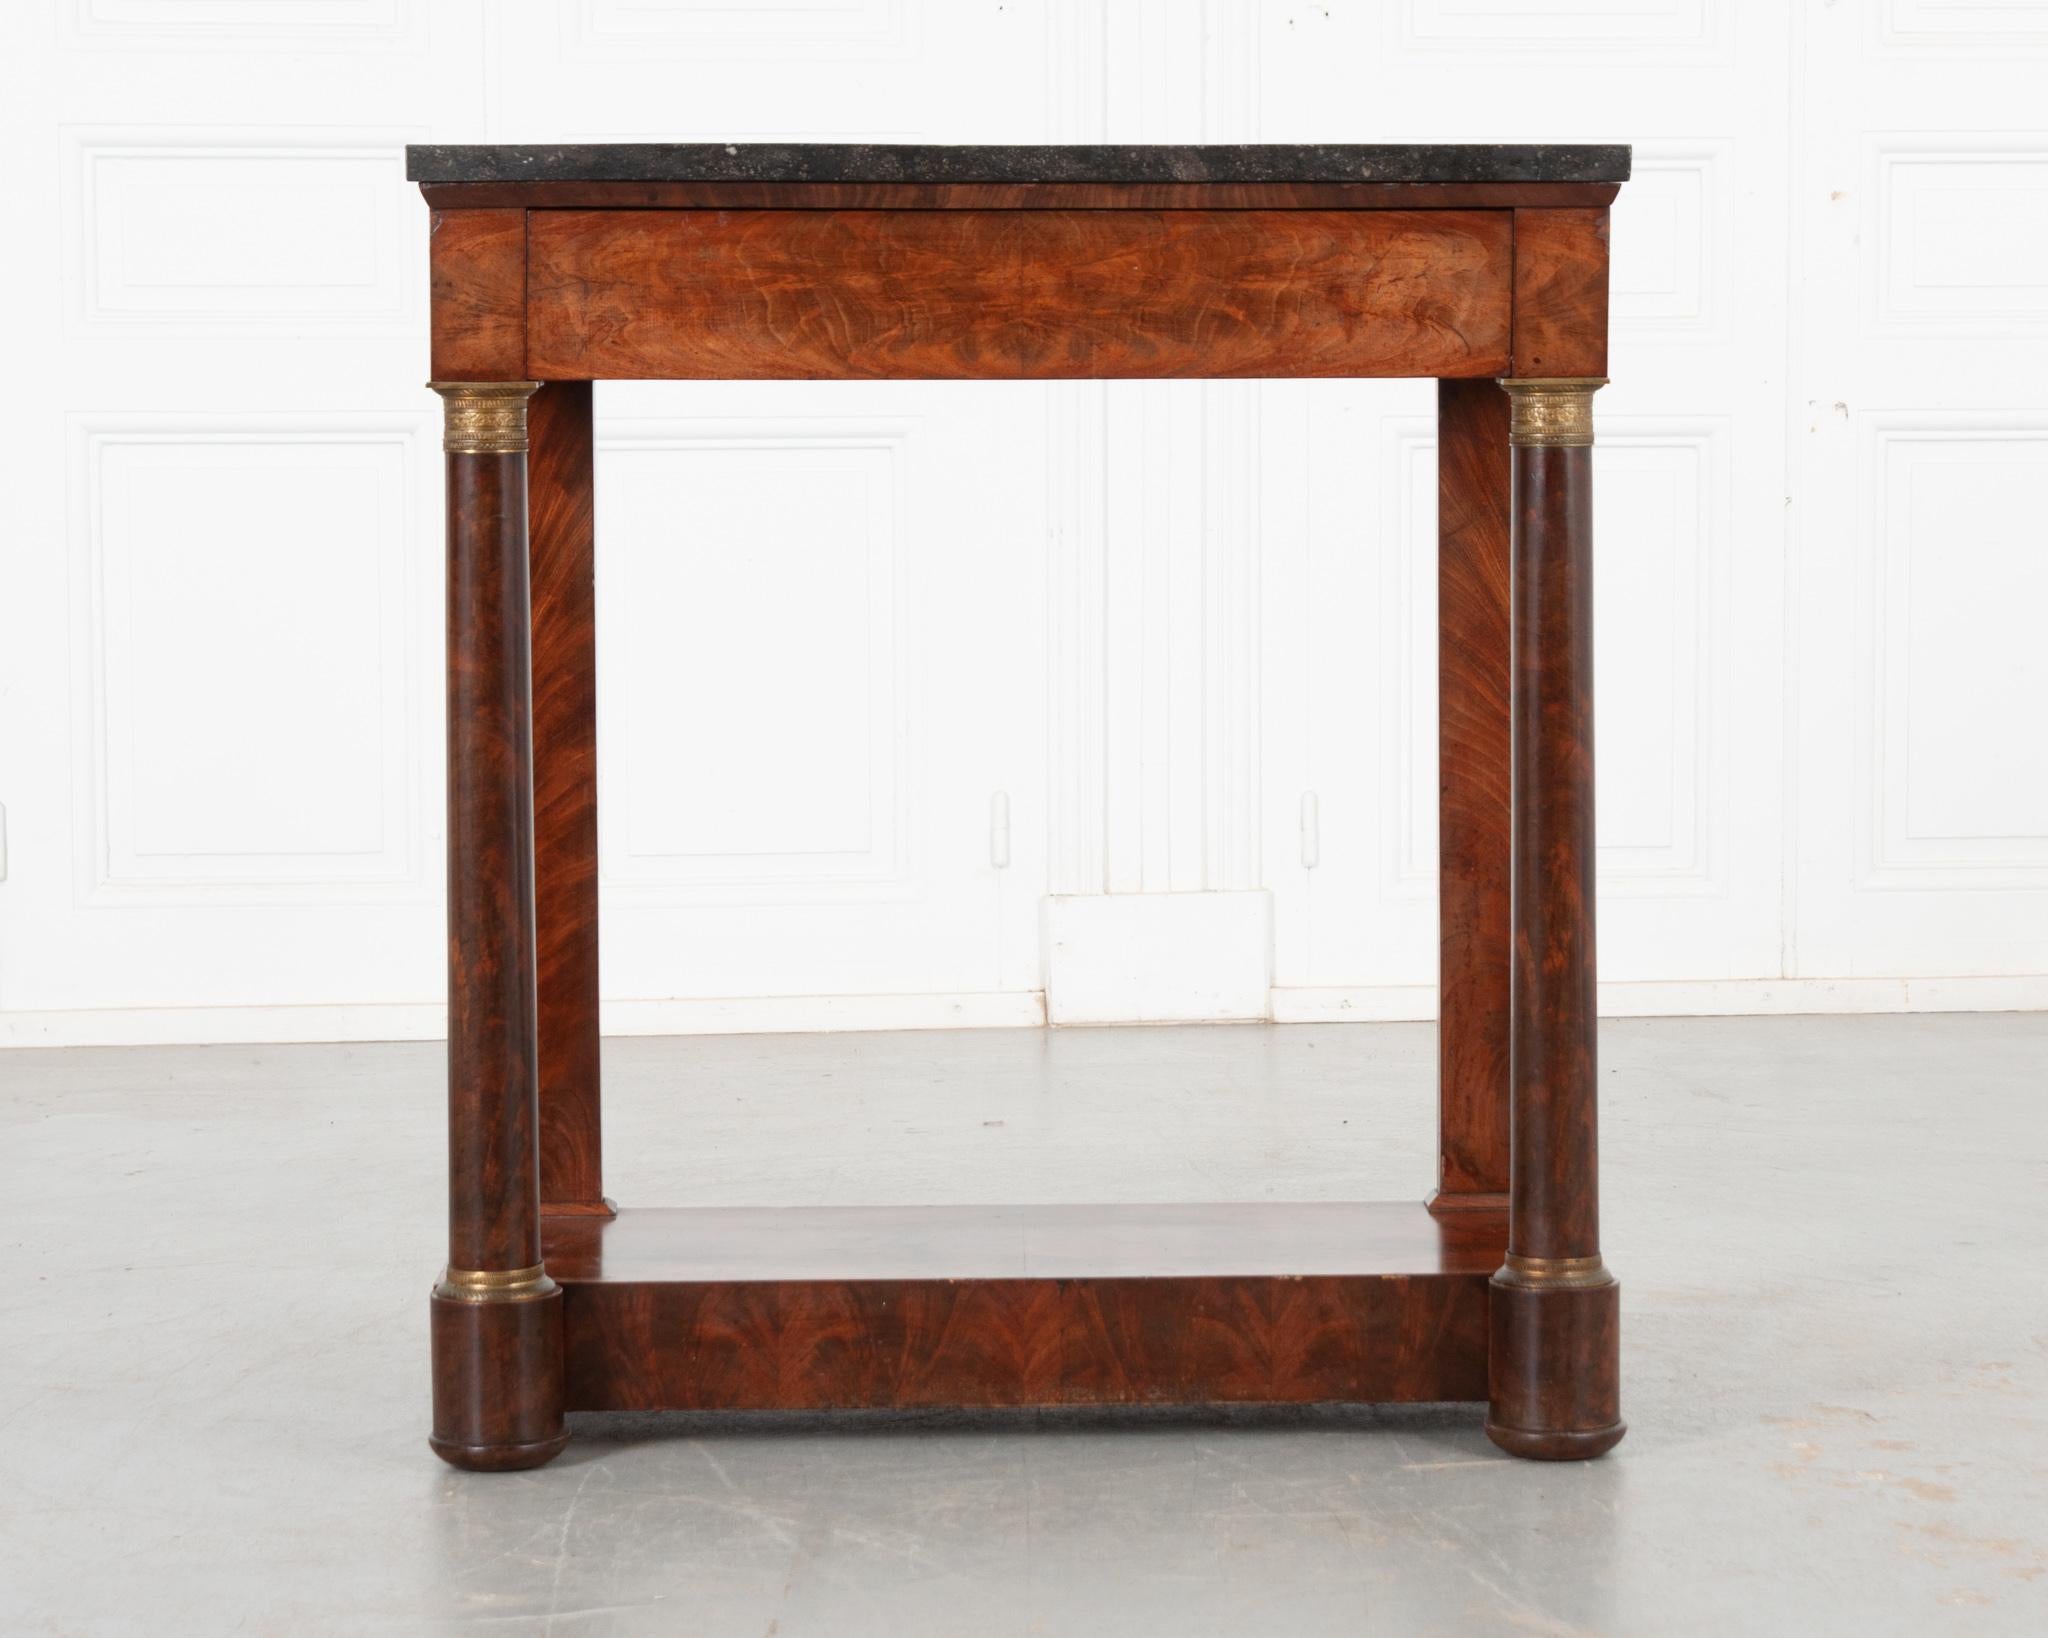 A classic and resolute French Empire console. Topped in Belgian granite, this beautiful table is finished in sensational bookmatched mahogany that is in wonderful antique condition. A single drawer is housed in the apron. Tall, column-form front